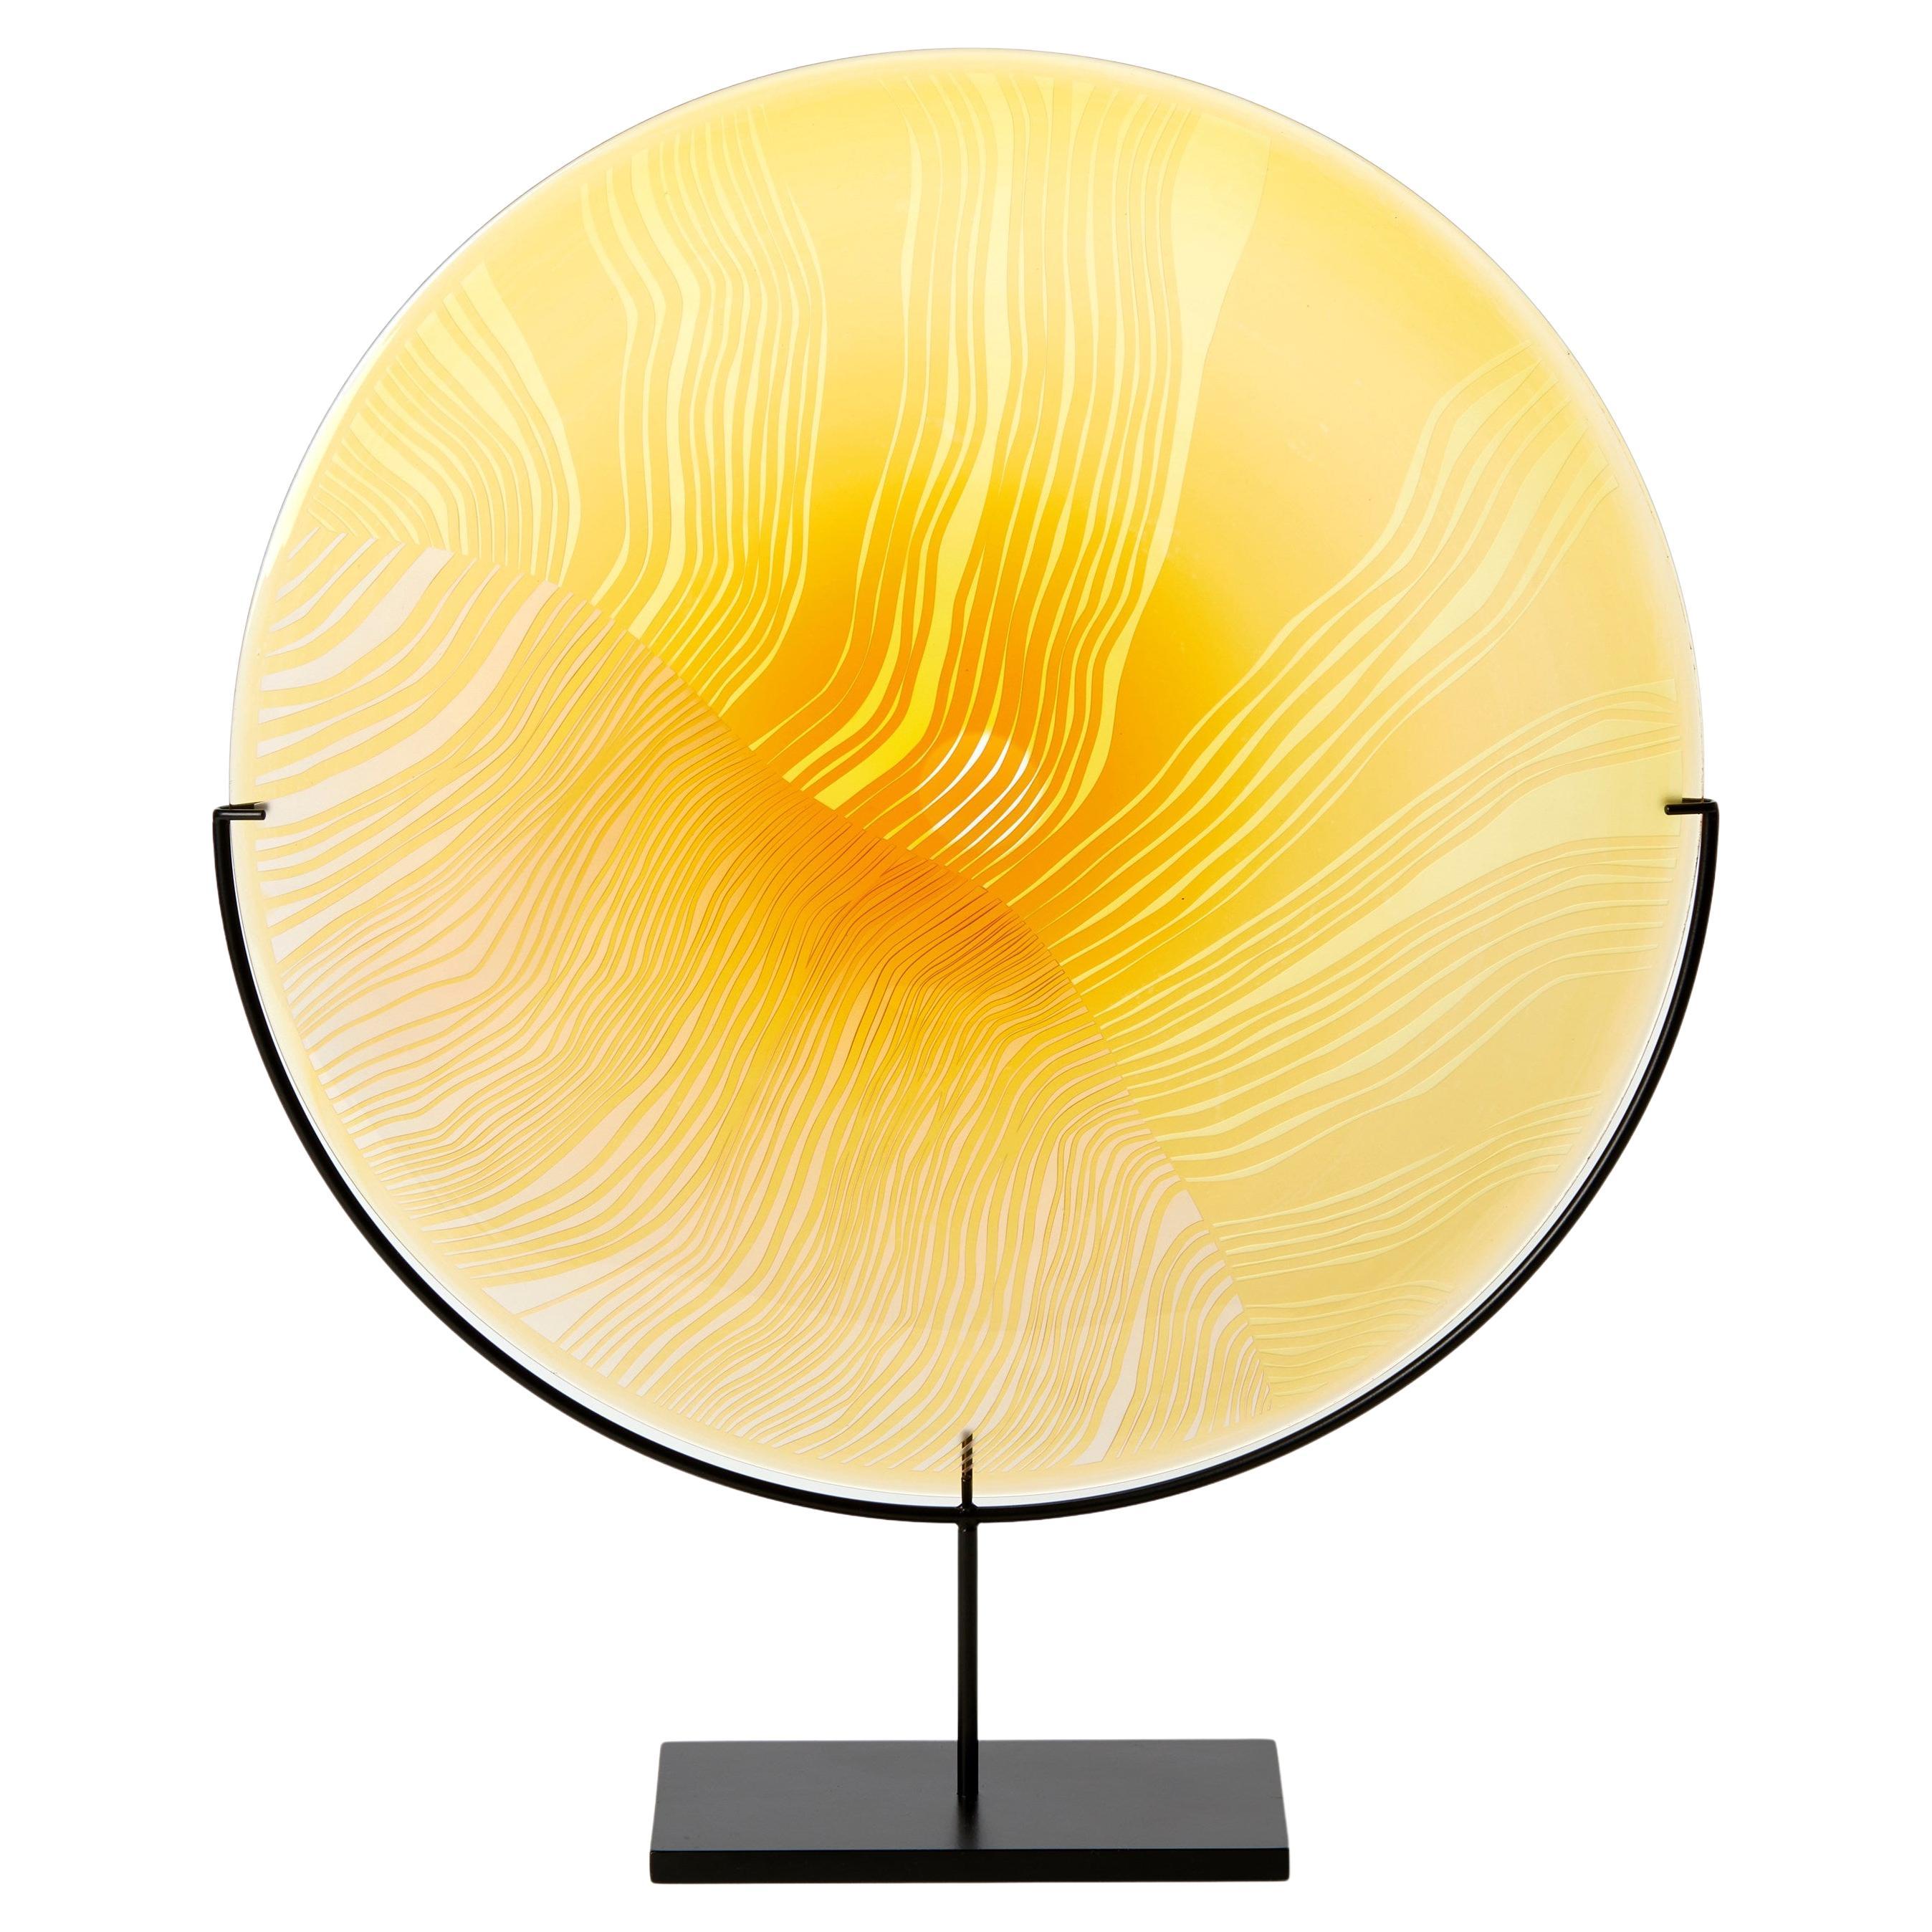 Solar Storm Gold over Gold, a mounted cut glass rondel artwork by Kate Jones